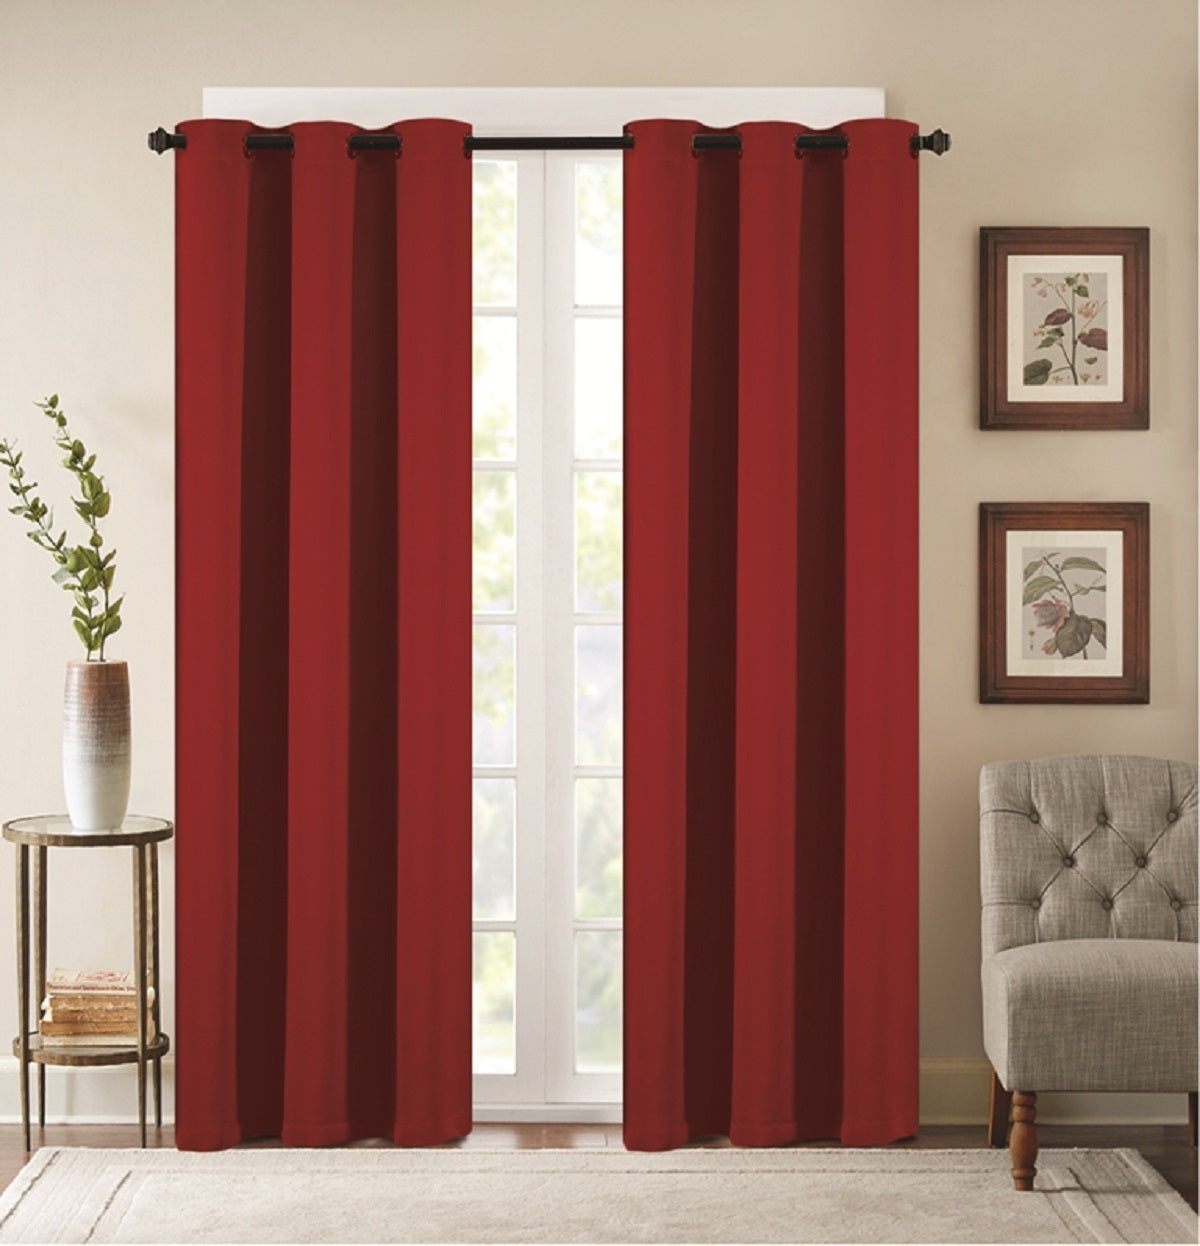 J&V TEXTILES 4-Panels: Room Darkening Thermal Insulated Blackout Grommet Window Curtain Panels for Living Room, Goodies N Stuff